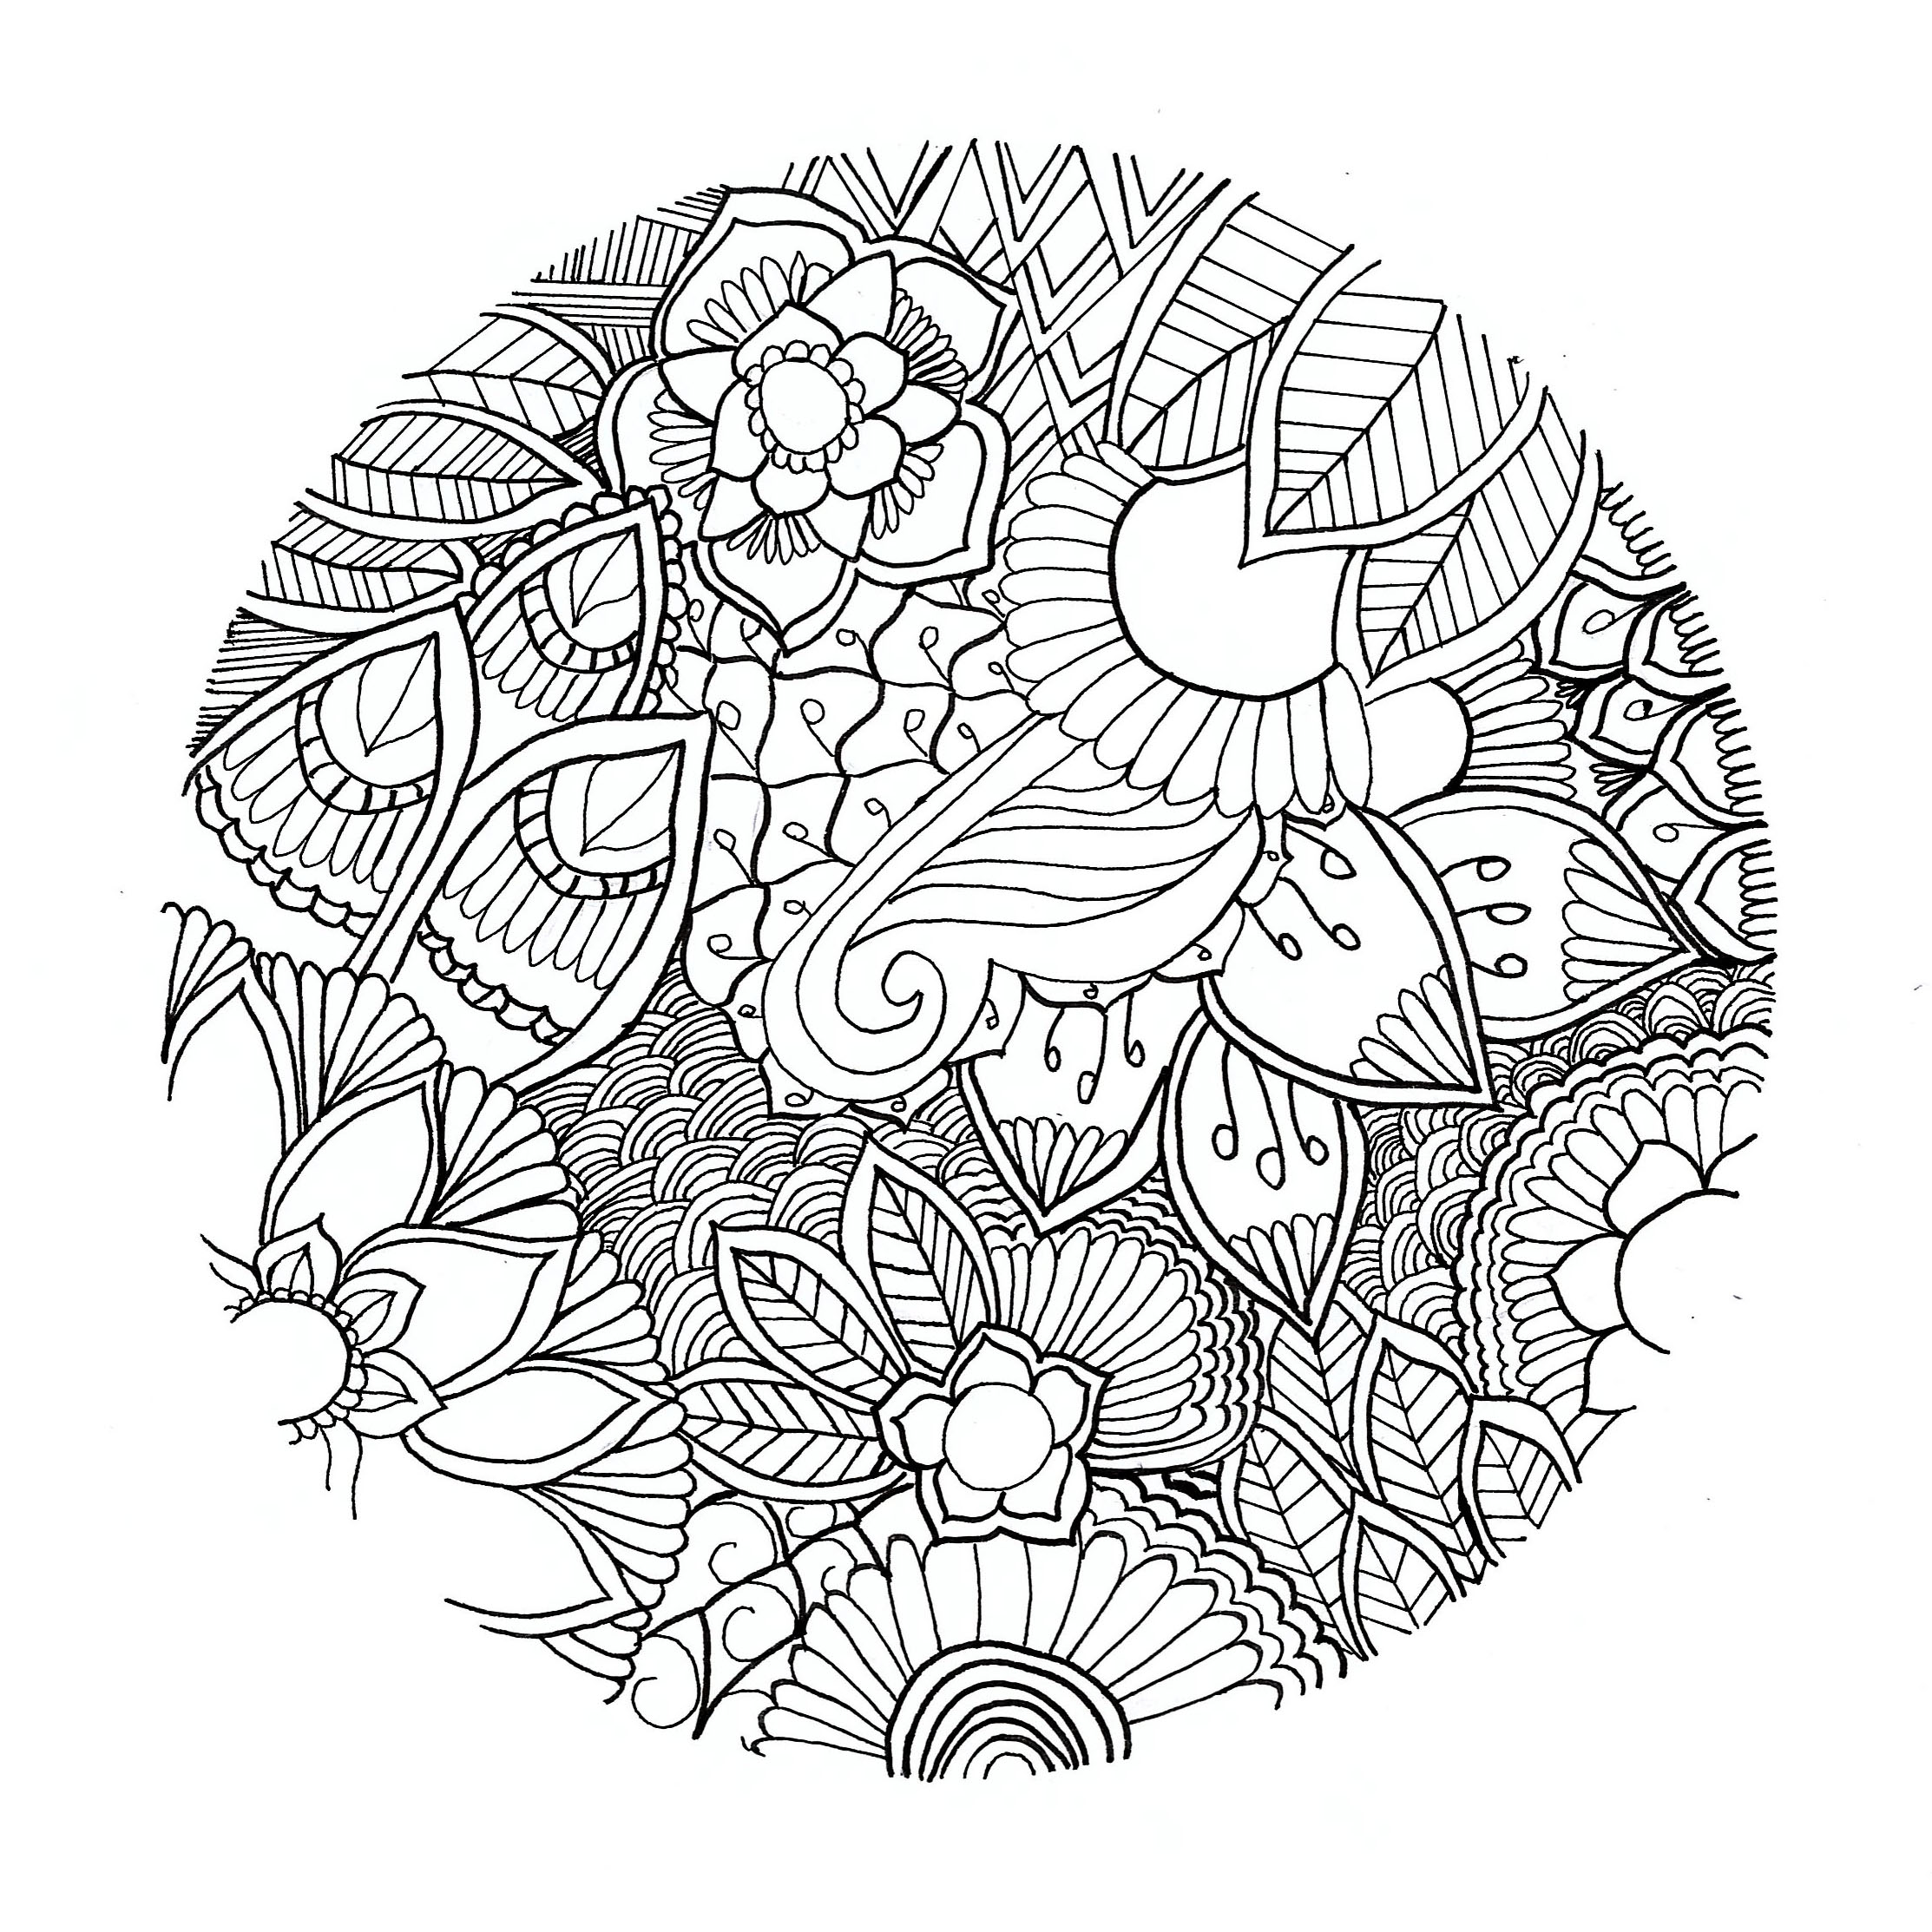 Flowers in a circle. Details relatively easy to color, for a Mandala coloring page very original and of high quality. Feel free to let your instincts decide where to color, and what colors to choose.